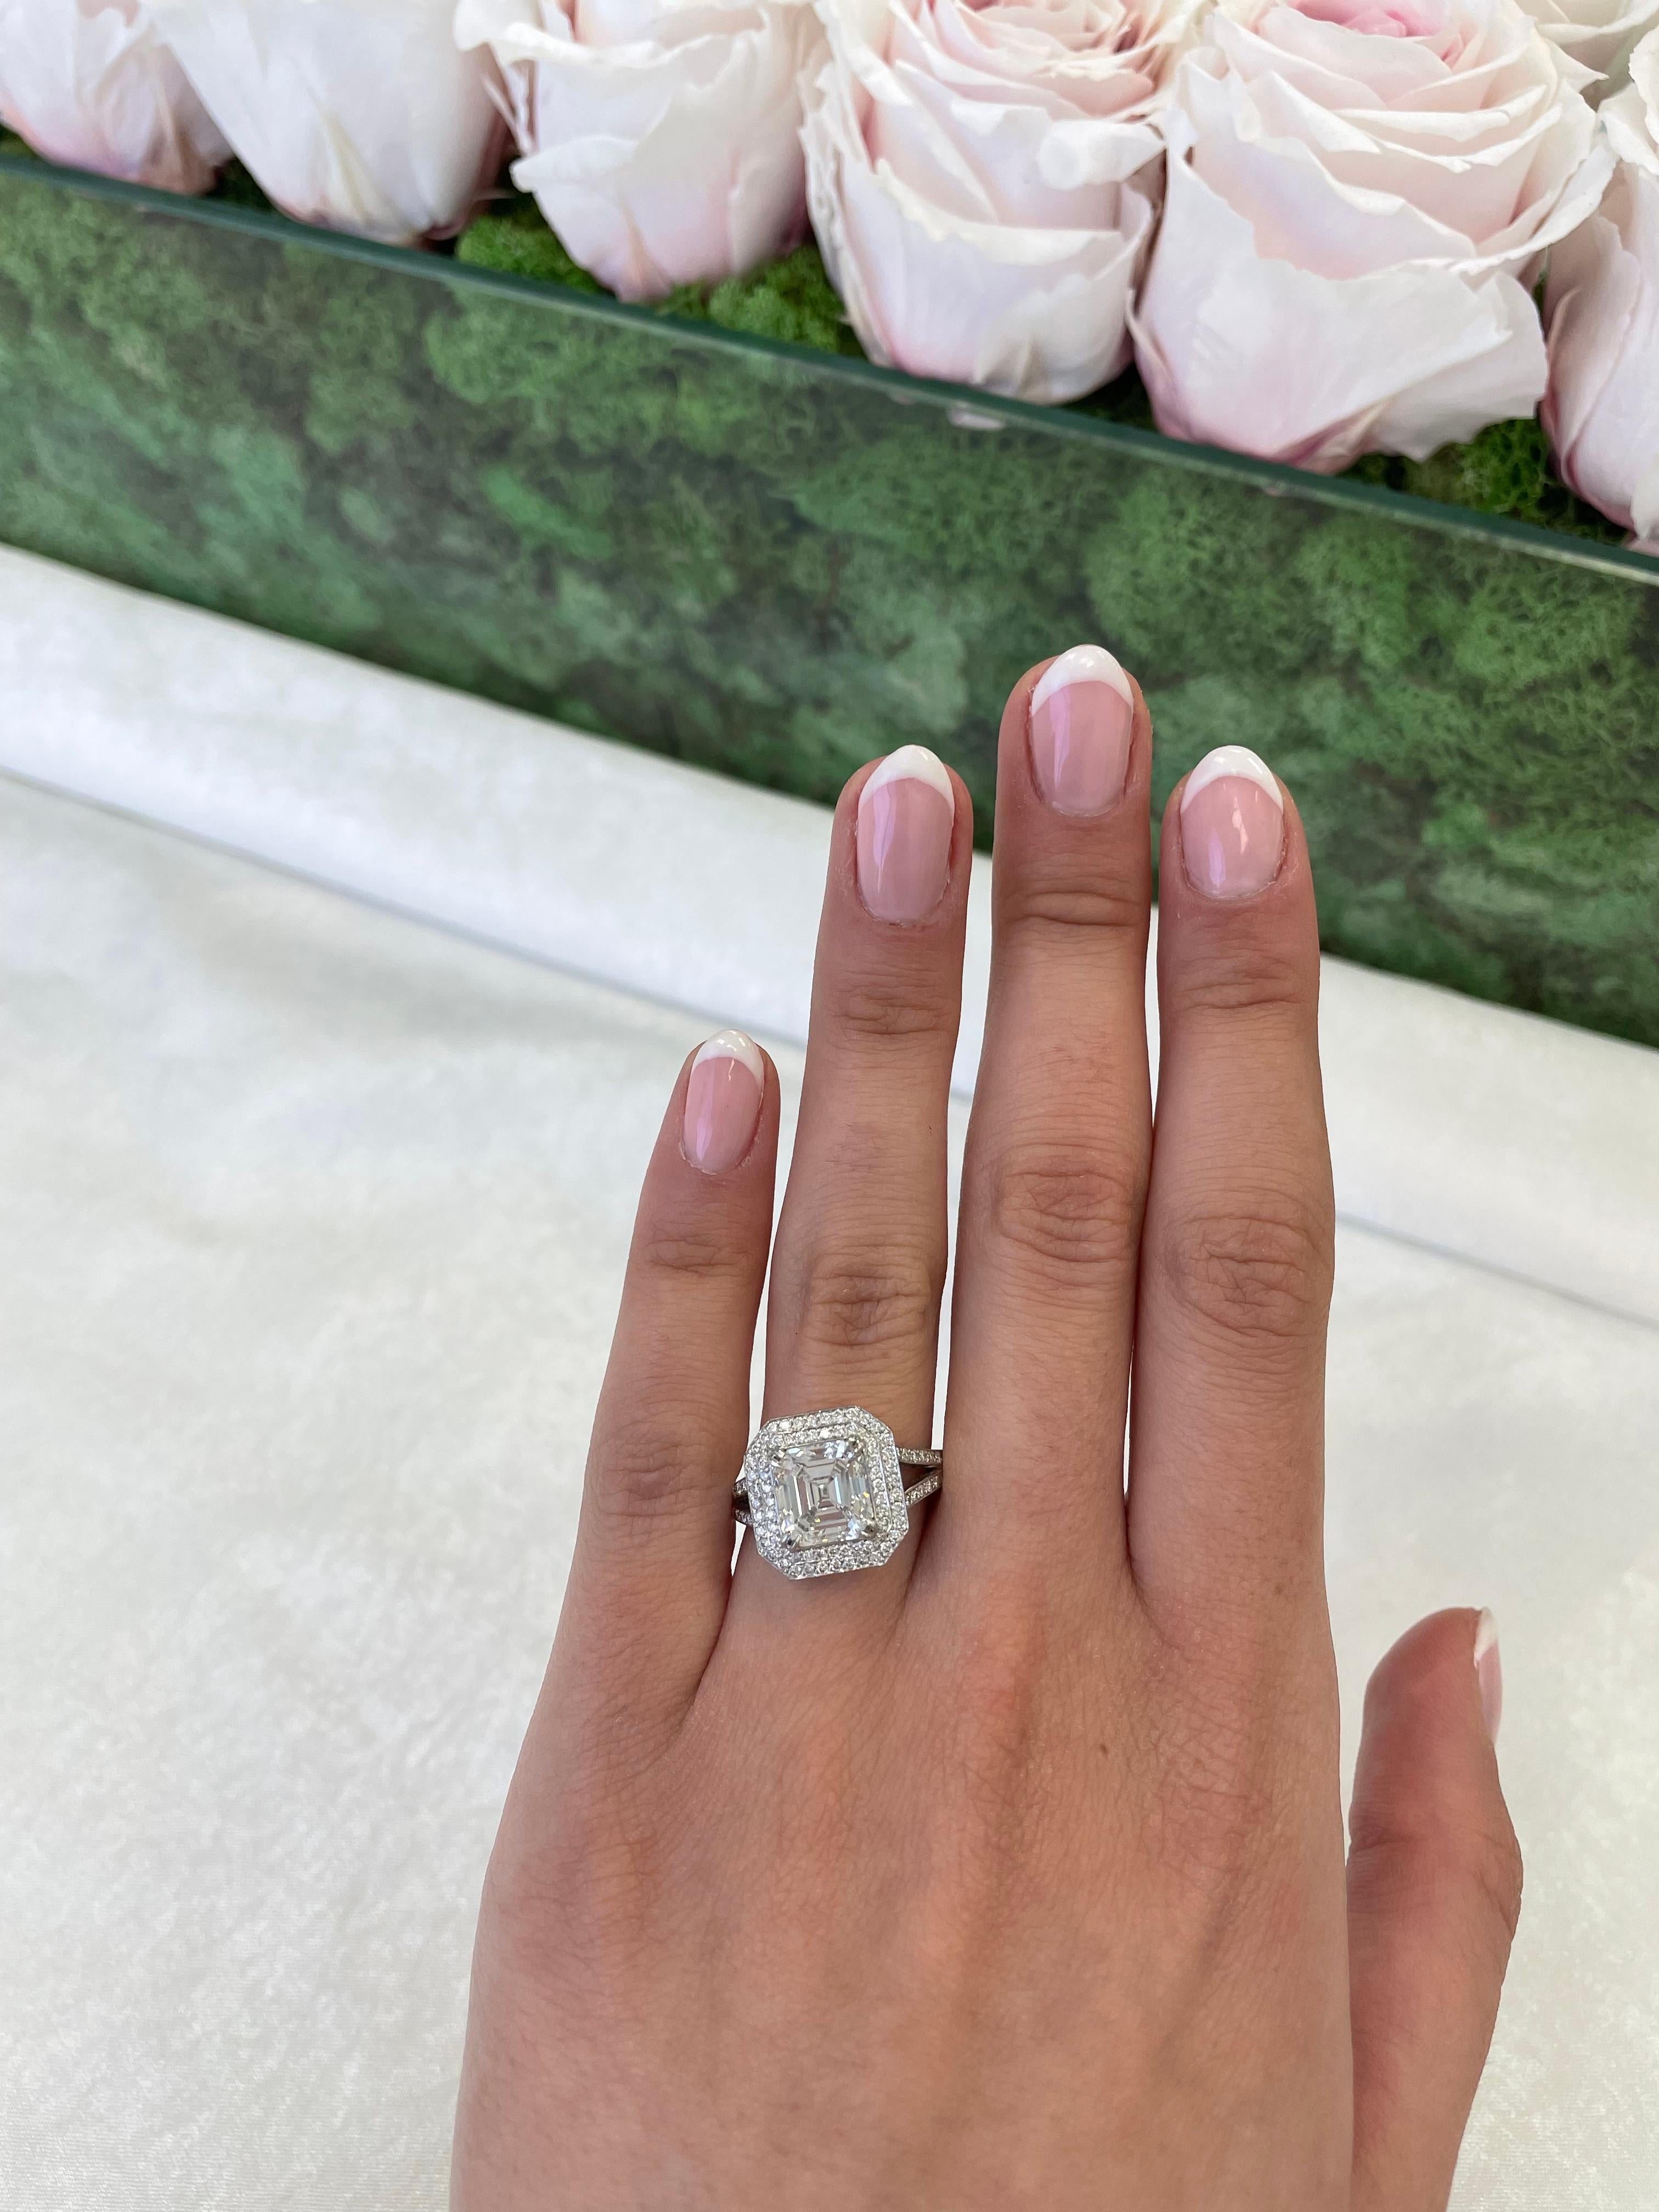 Stunning and classic three-stone diamond engagement ring, GIA certified. 
High jewelry by Alexander Beverly Hills. 
3.60 carats total diamond weight.
Center stone, 3.02ct asscher cut diamond. F color grade, VS1 clarity grade, GIA certified.